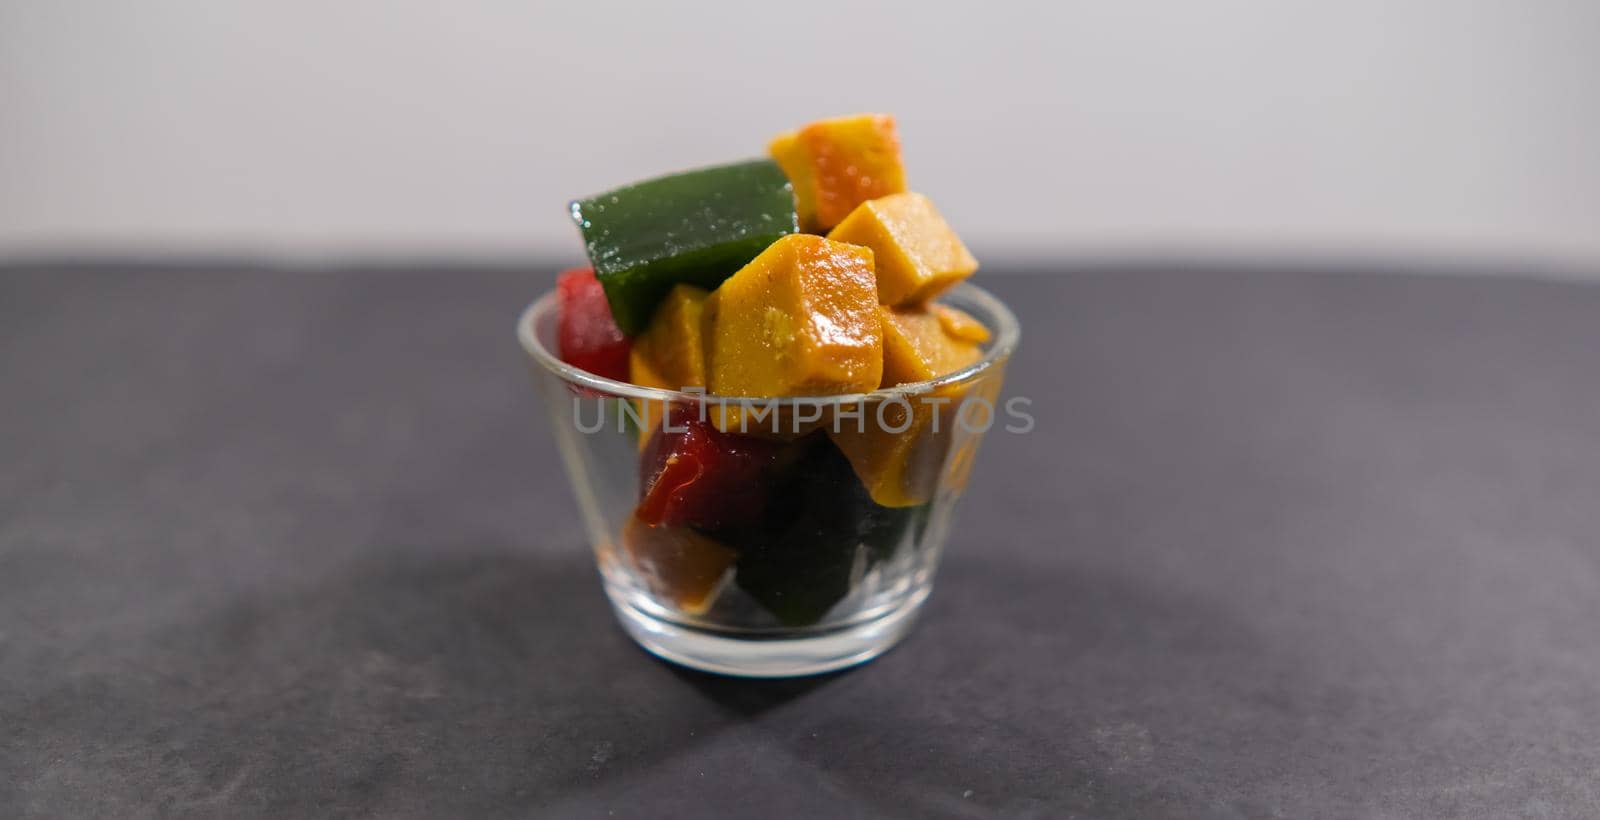 Wide view of glass of red, yellow, and green fruit paste slices above black and white background. Close-up of authentic natural Mexican candy cubes in cup above dark surface. Tasty traditional snacks